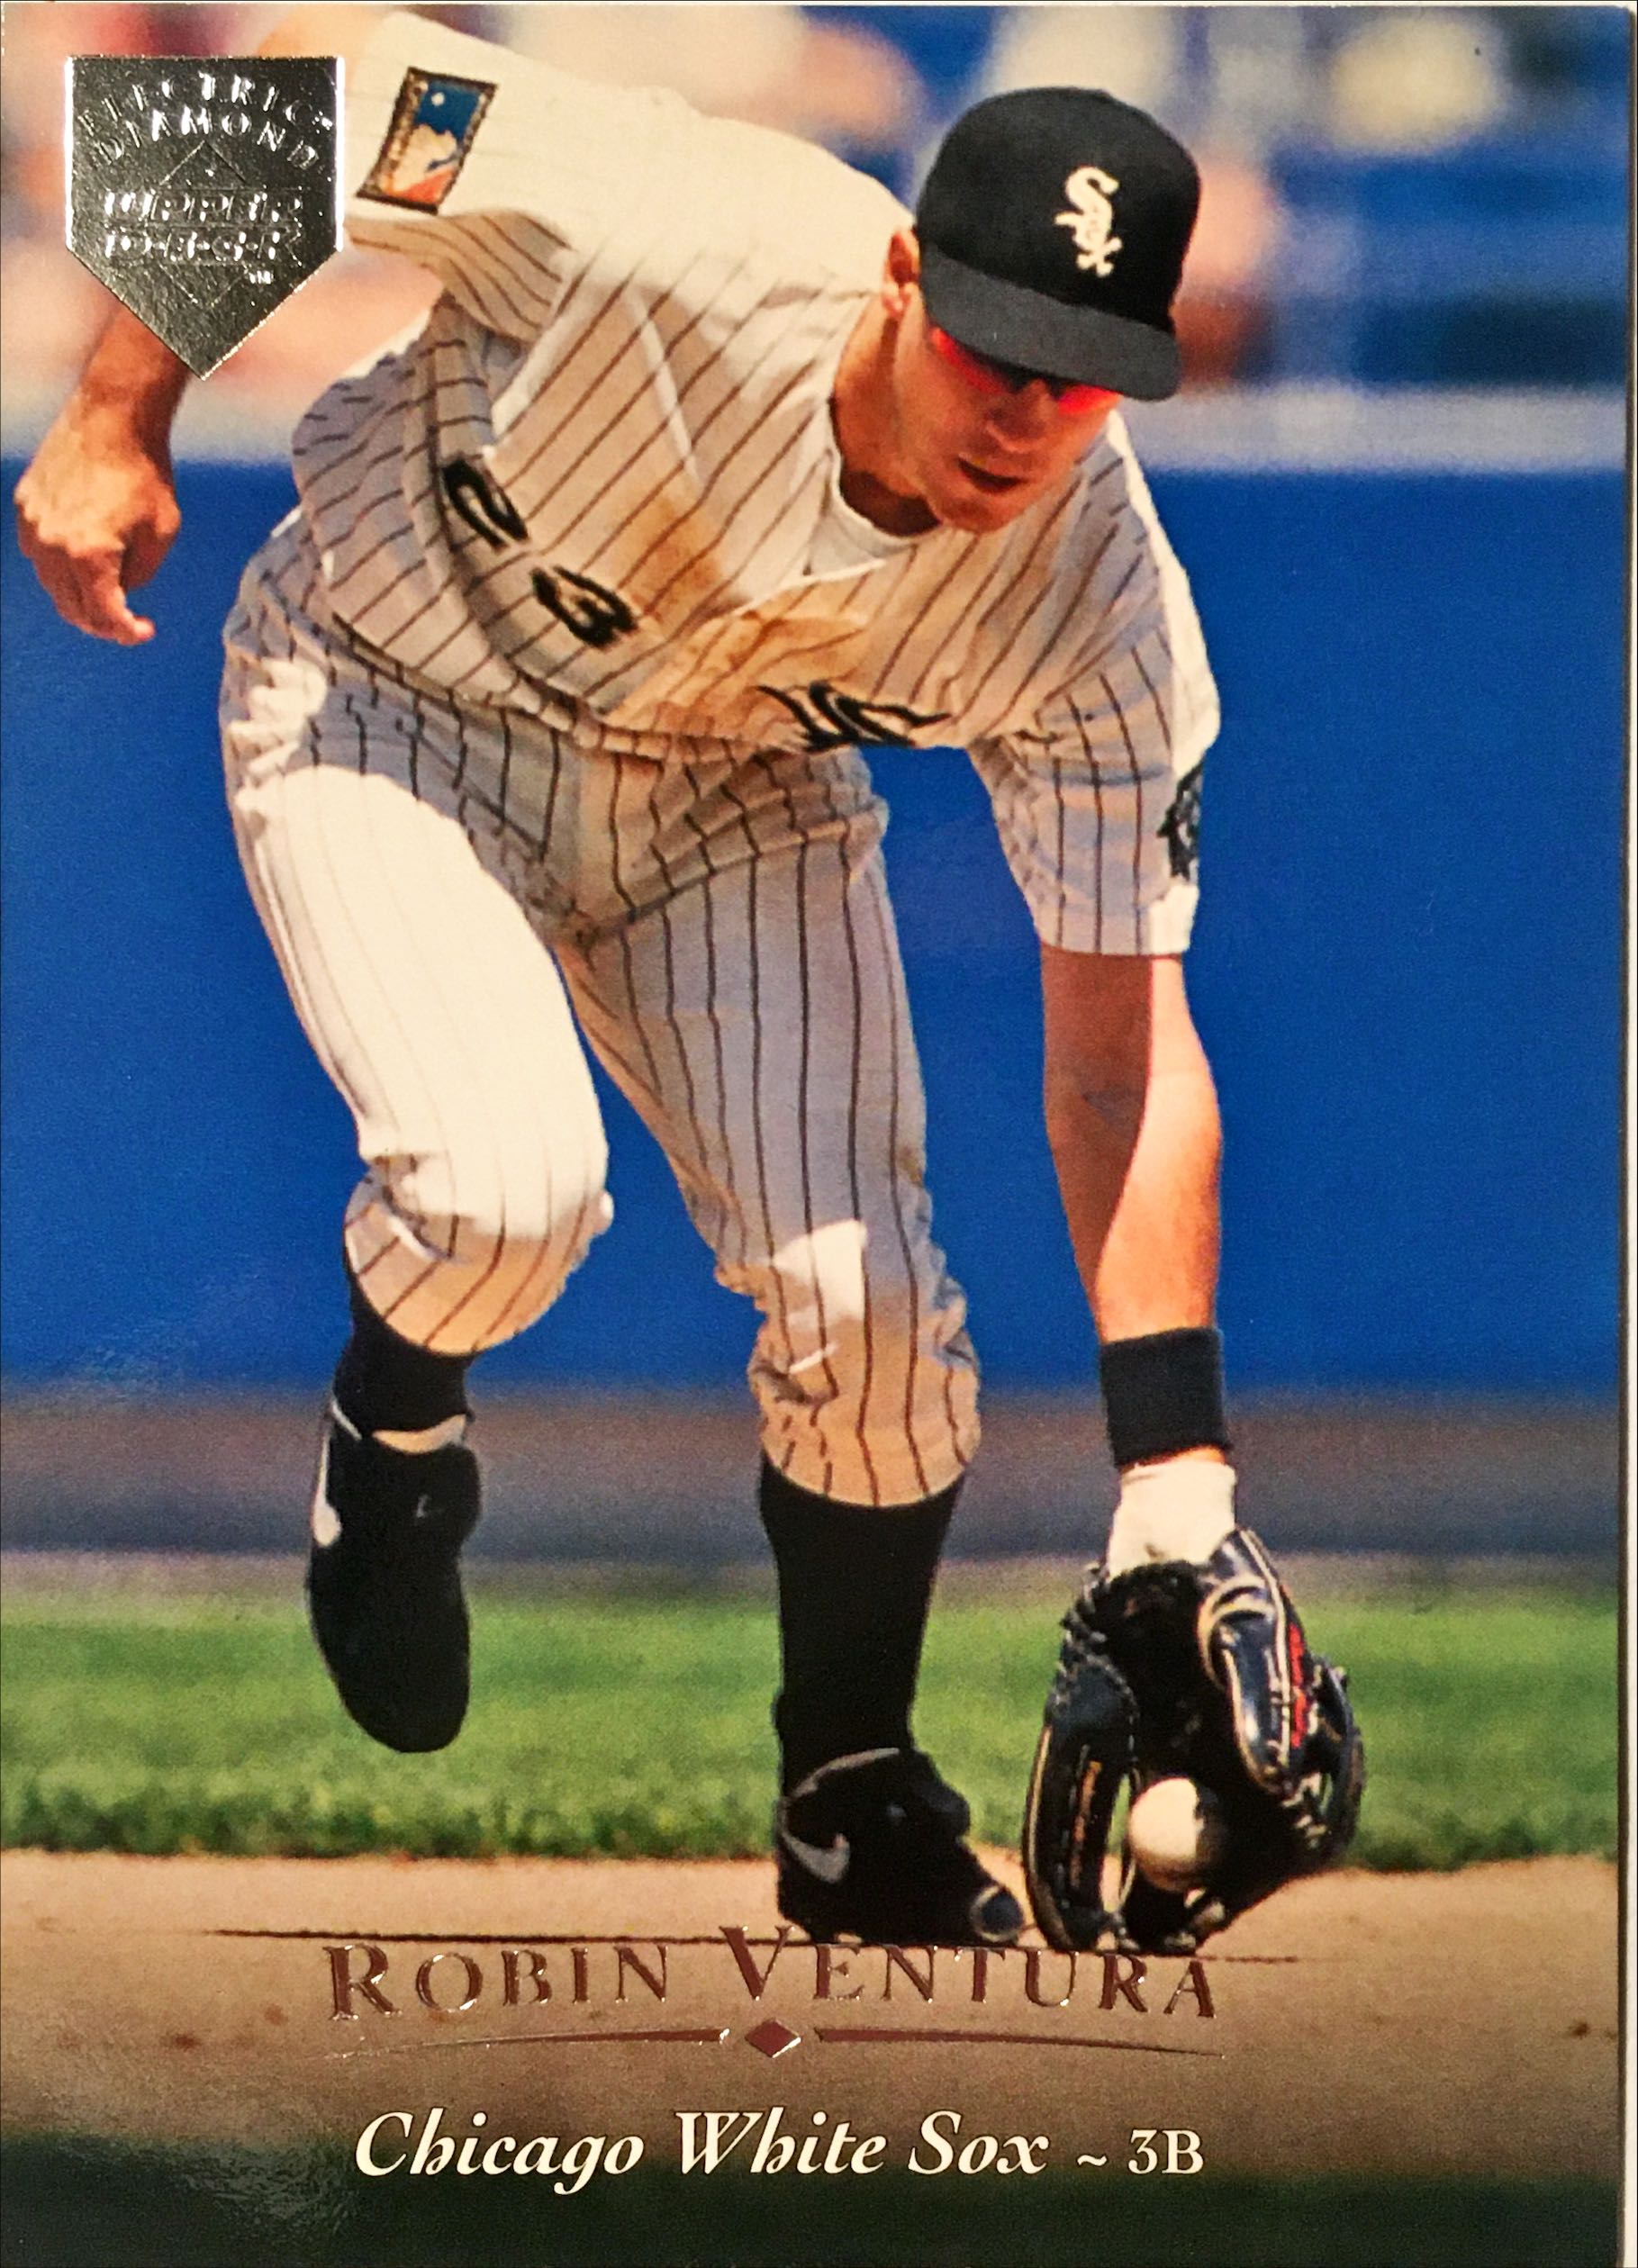 1995 Upper Deck Electric Diamond 201 front image